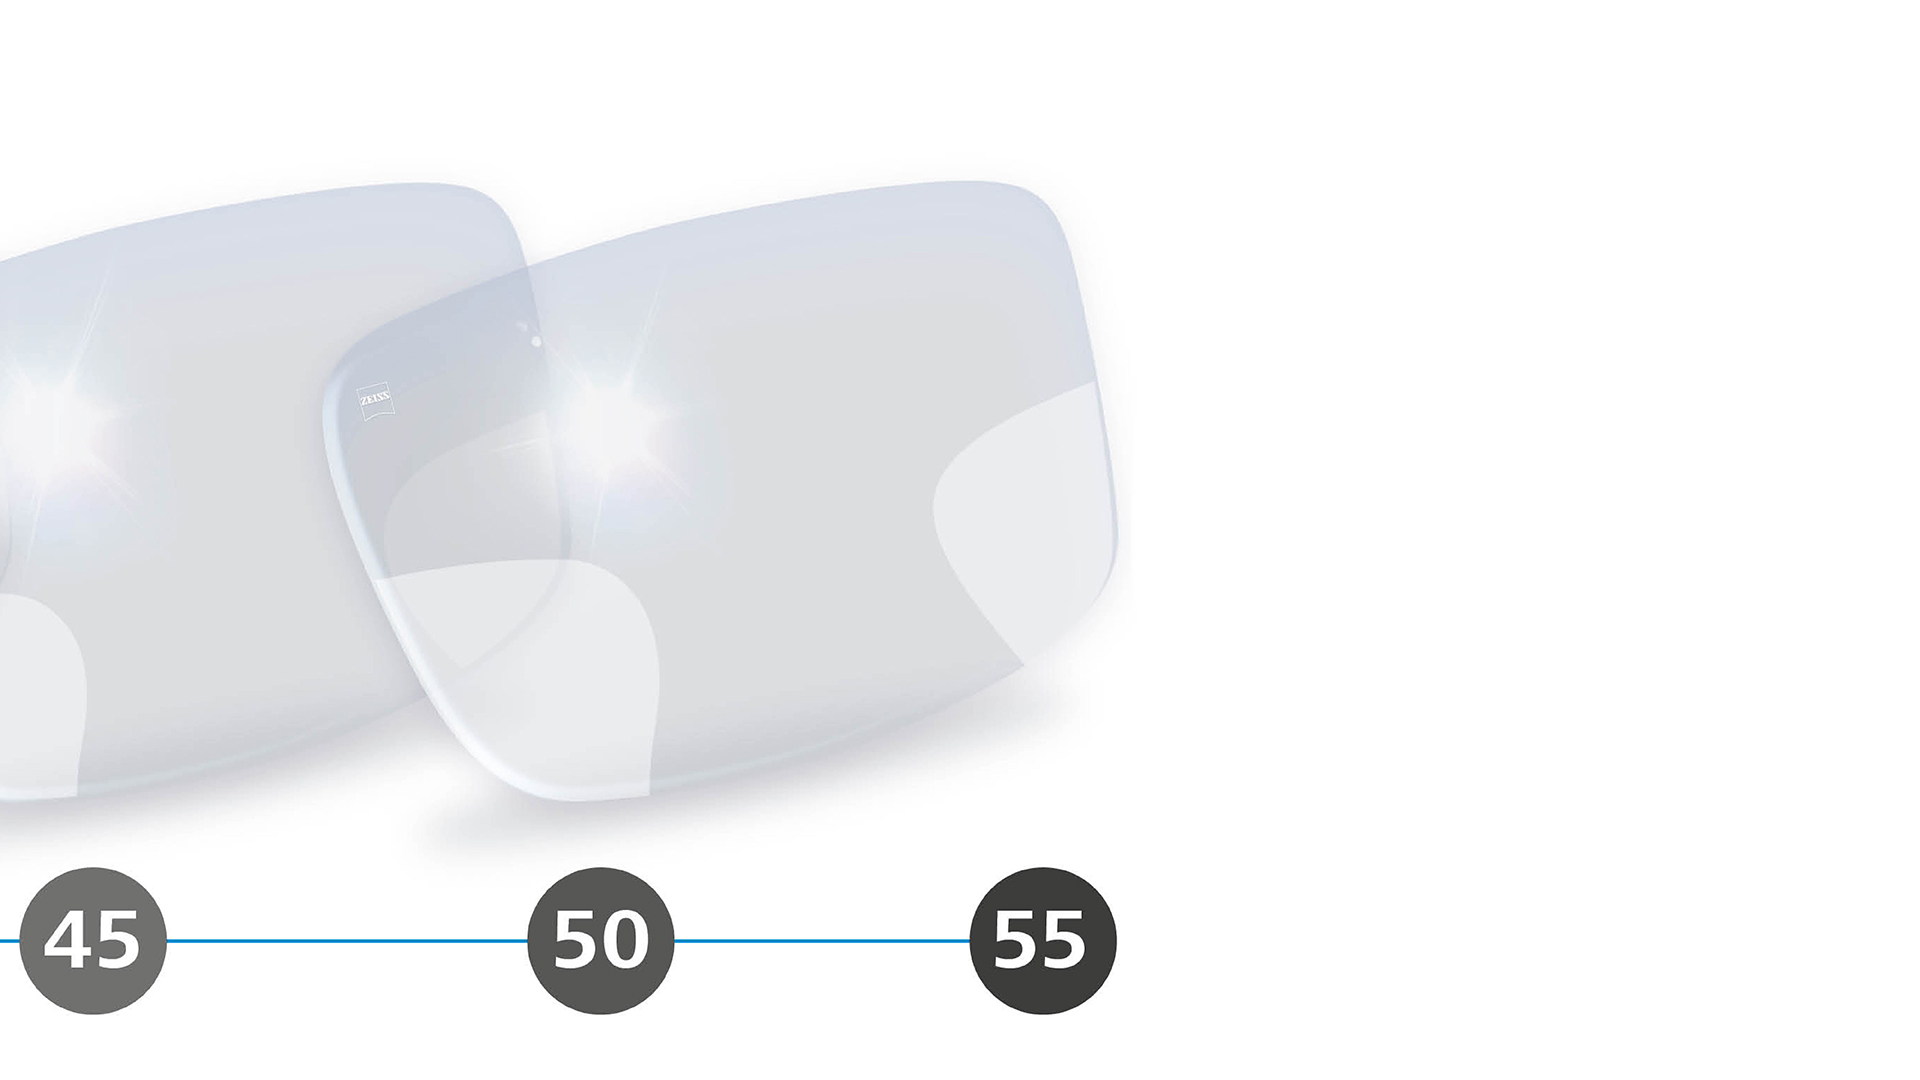 3D illustration of progressive lenses with peripheral blurr zones for the ages 40+ years.